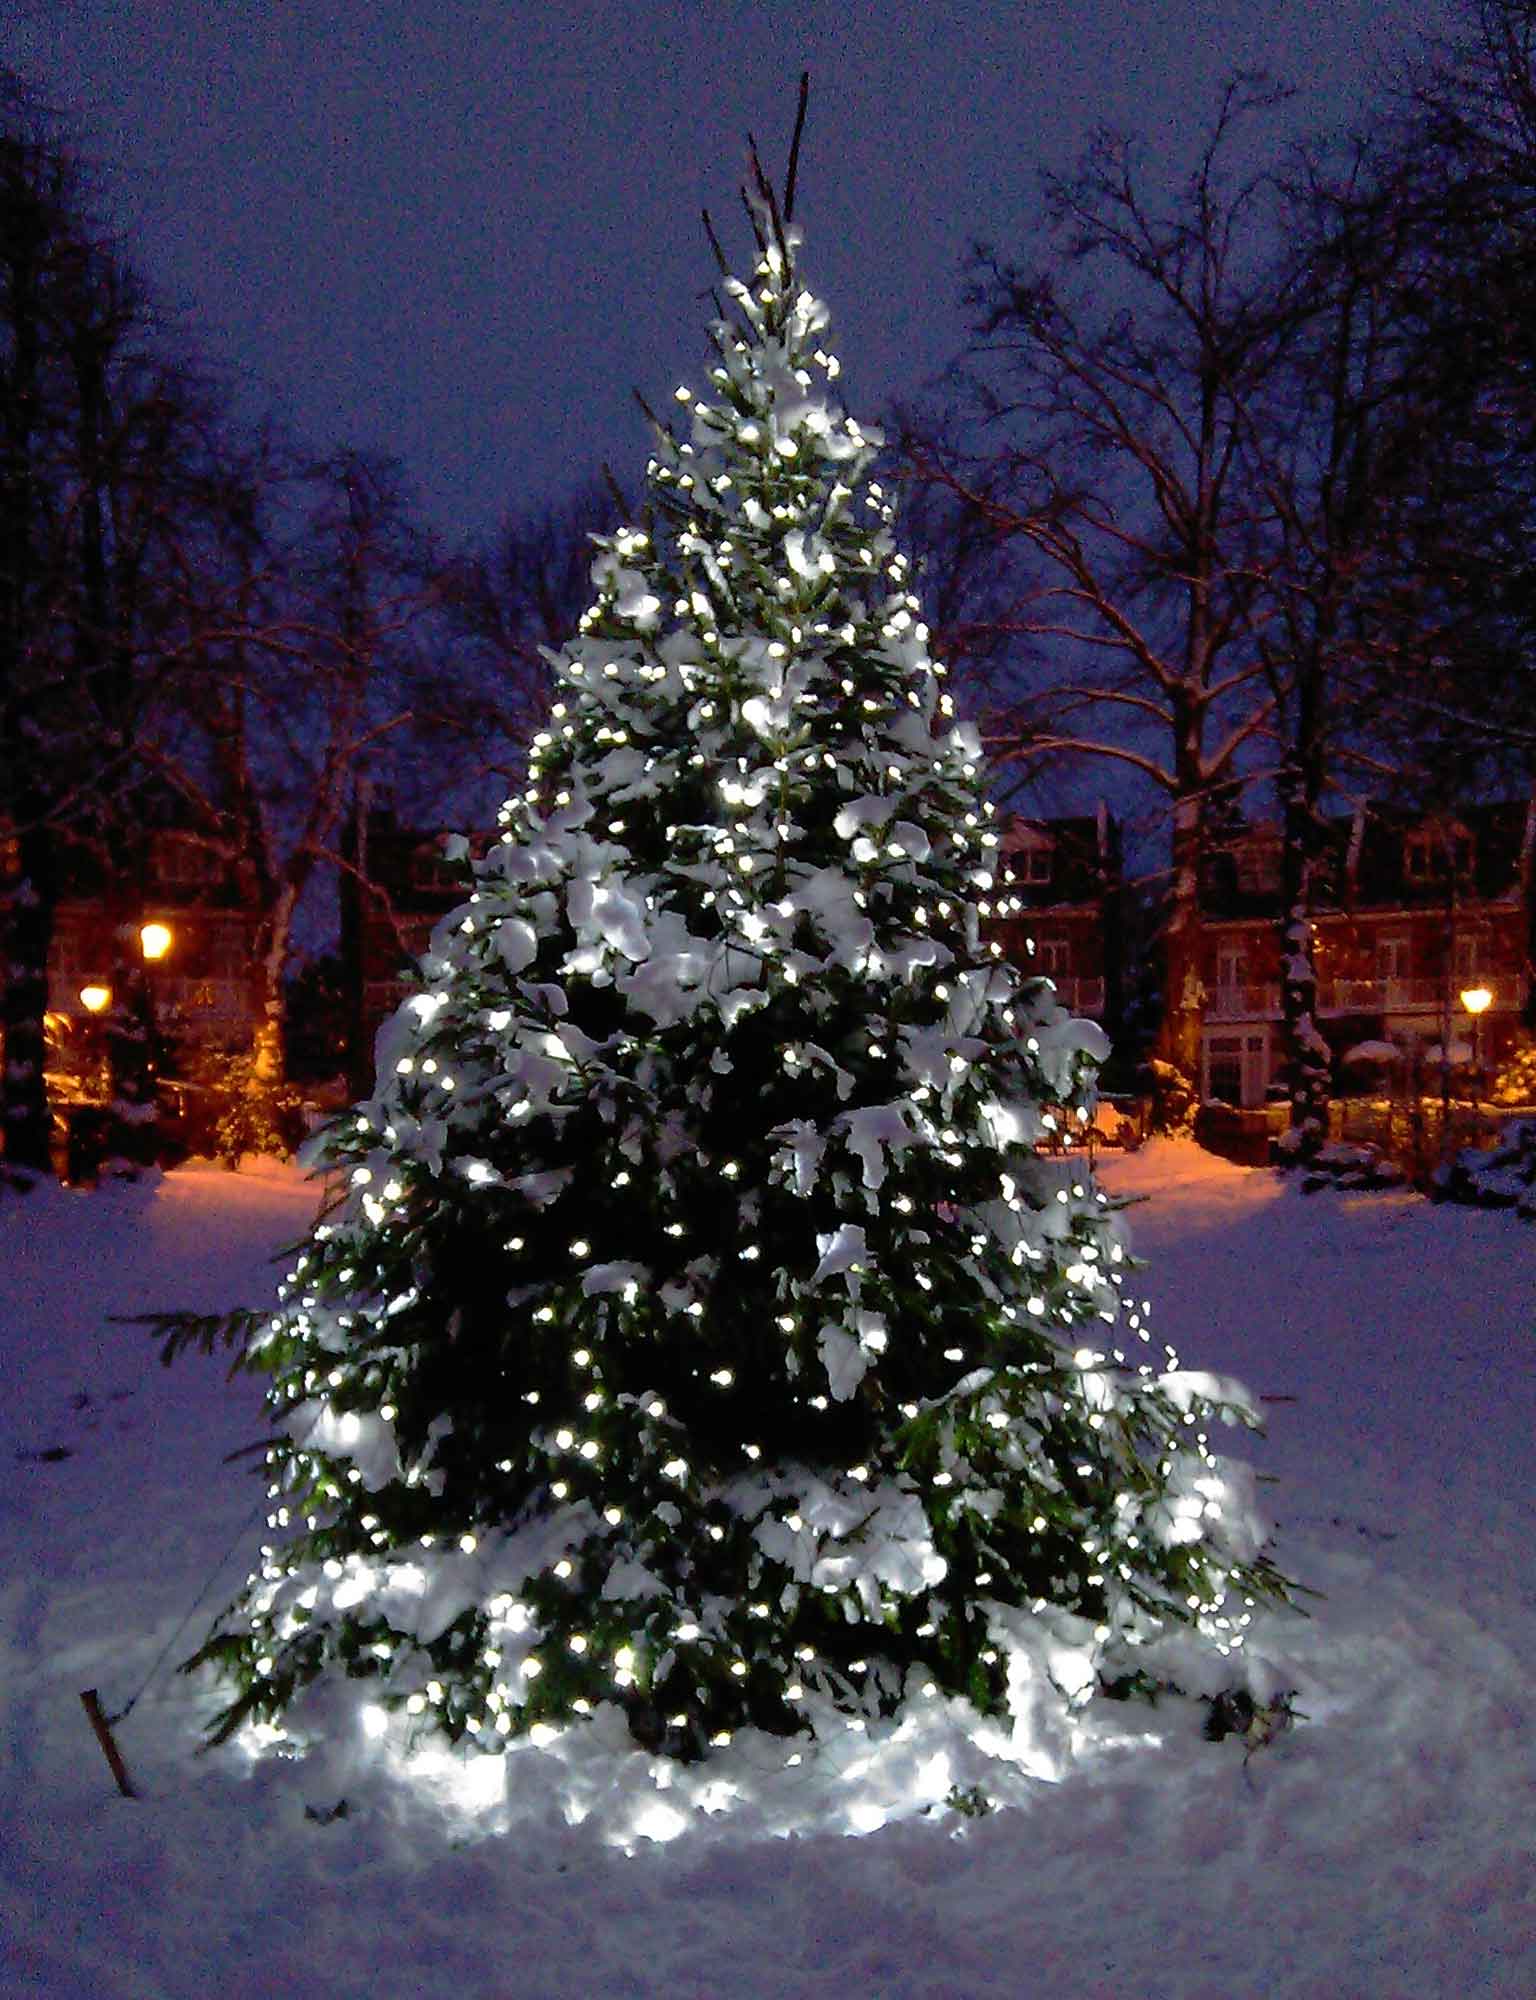 Led outdoor tree lights - Will Give A Remarkable Look To ...